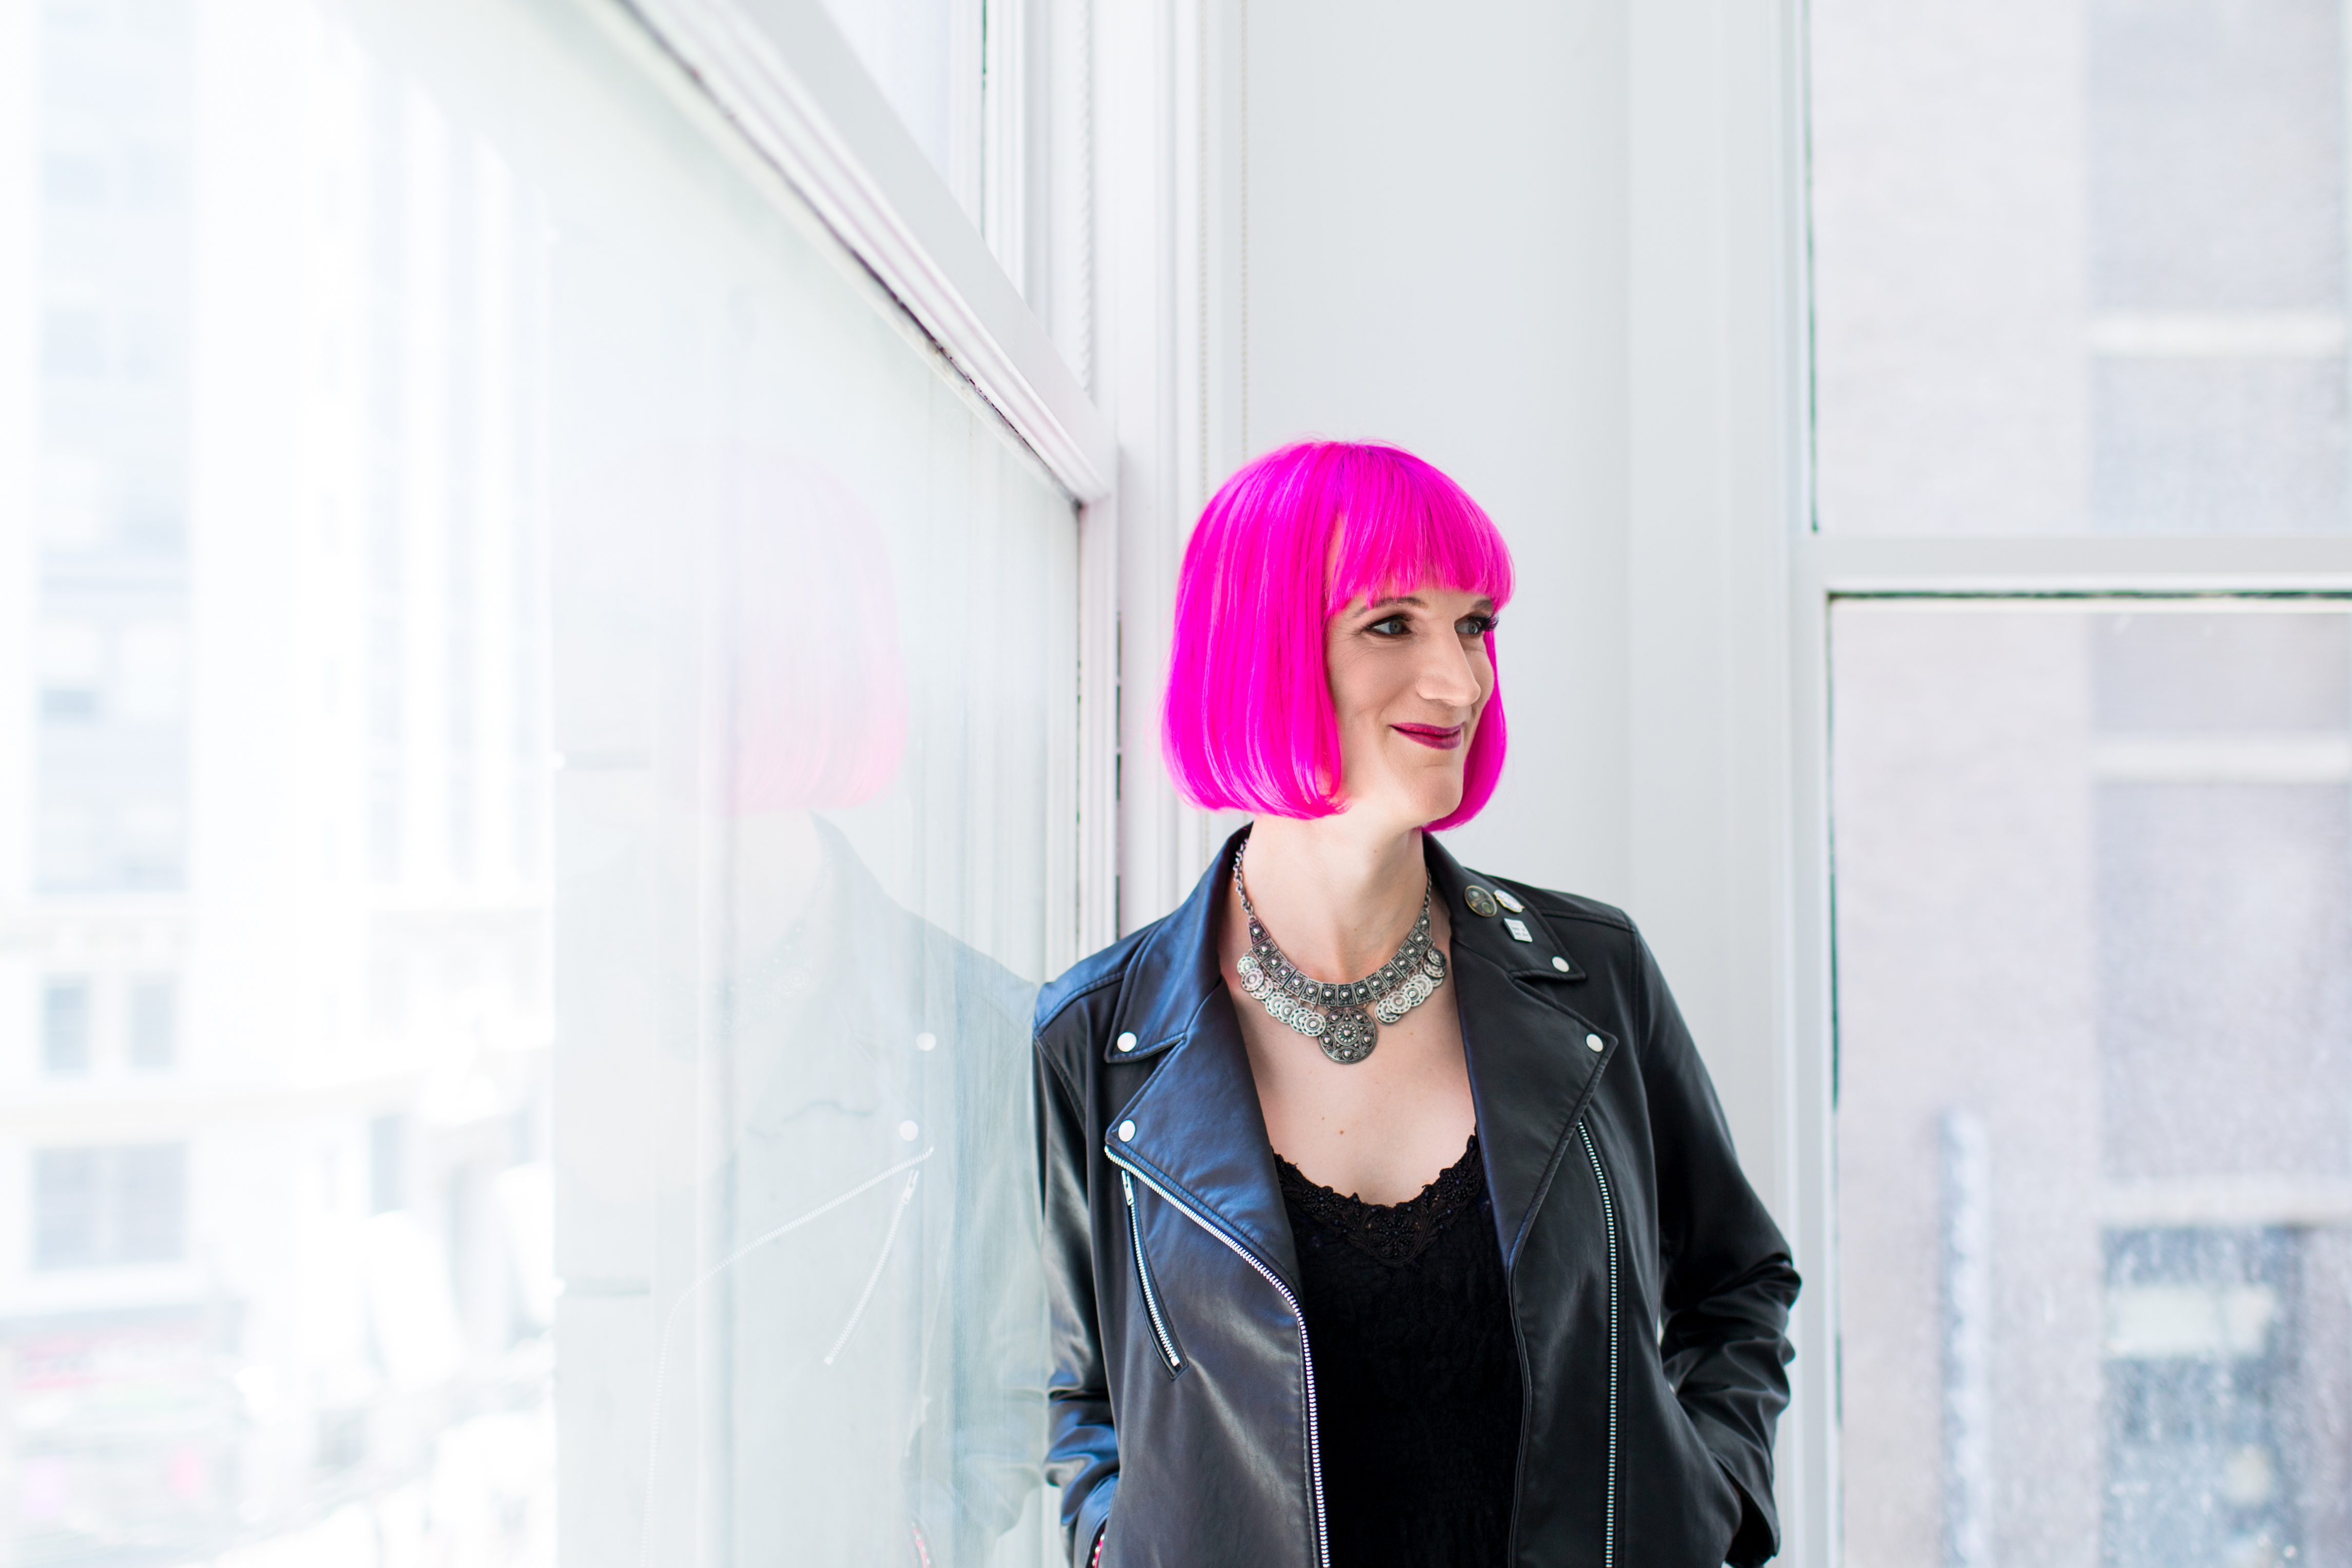 Charlie Jane Anders (photo by Sarah Deragon/Portraits to the People)